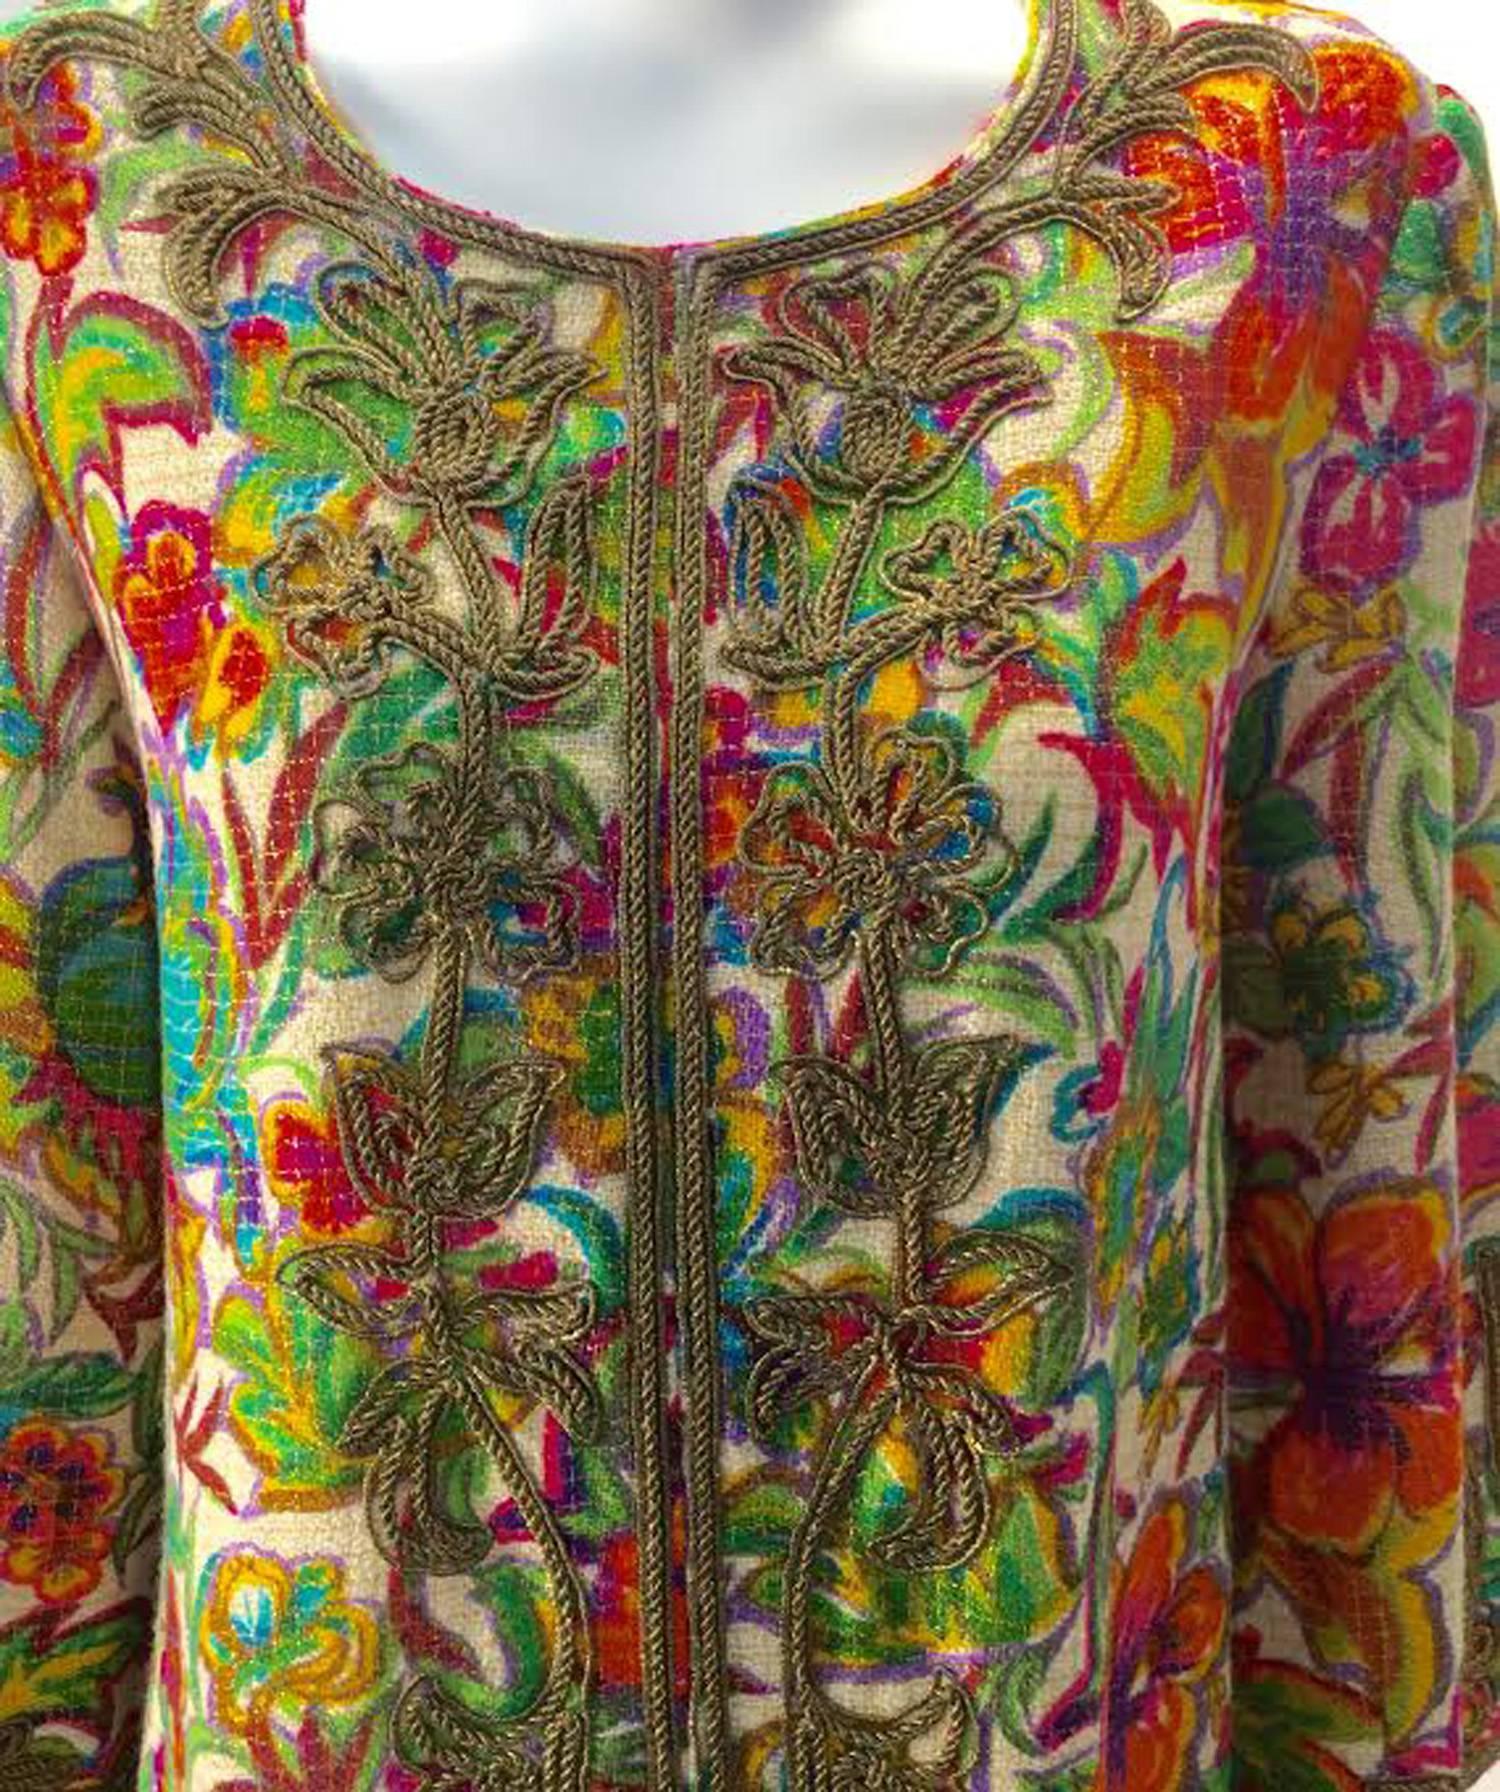 Vintage Floral multi-colored embroidered Kaftan by Malouf Design.  Known as the maker of the "perfect negligee" Malouf design brought the Kaftan to the U.S. and allowed collector's of vintage to bring Malouf designs to day wear.  

This